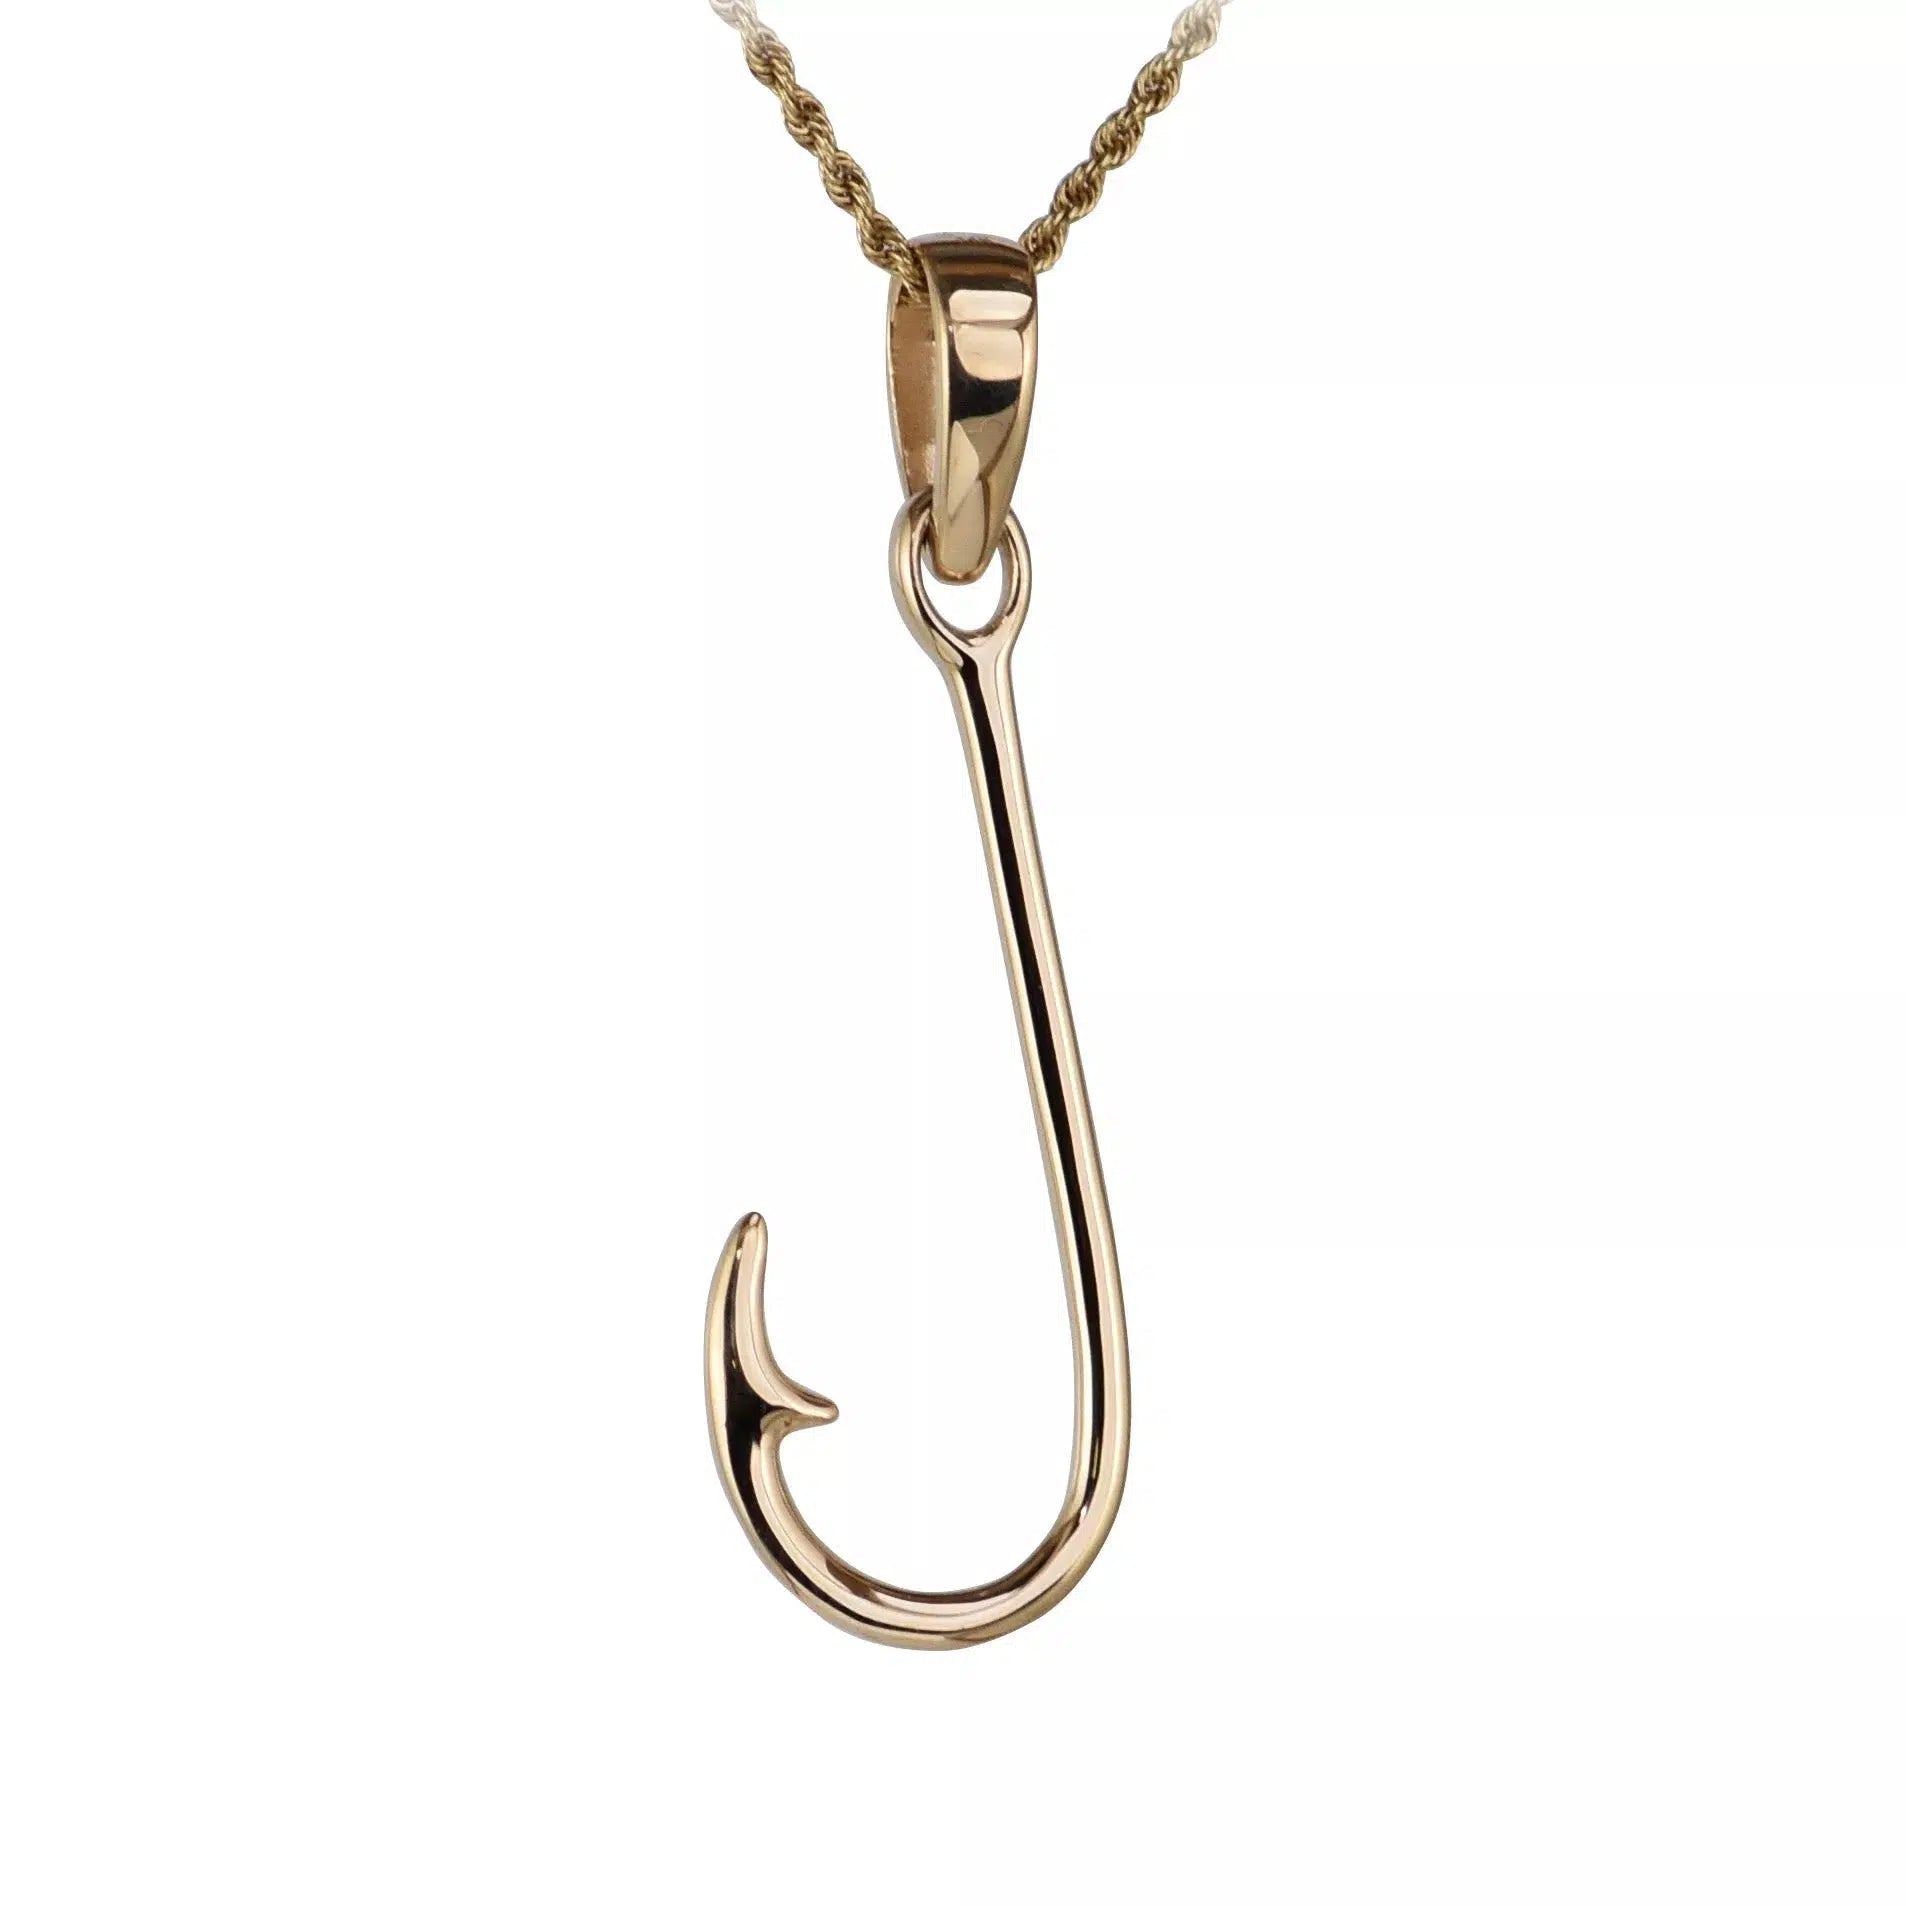 Fishing Hook Pendant - Large | Sea Shur Jewelry Polished Sterling Silver